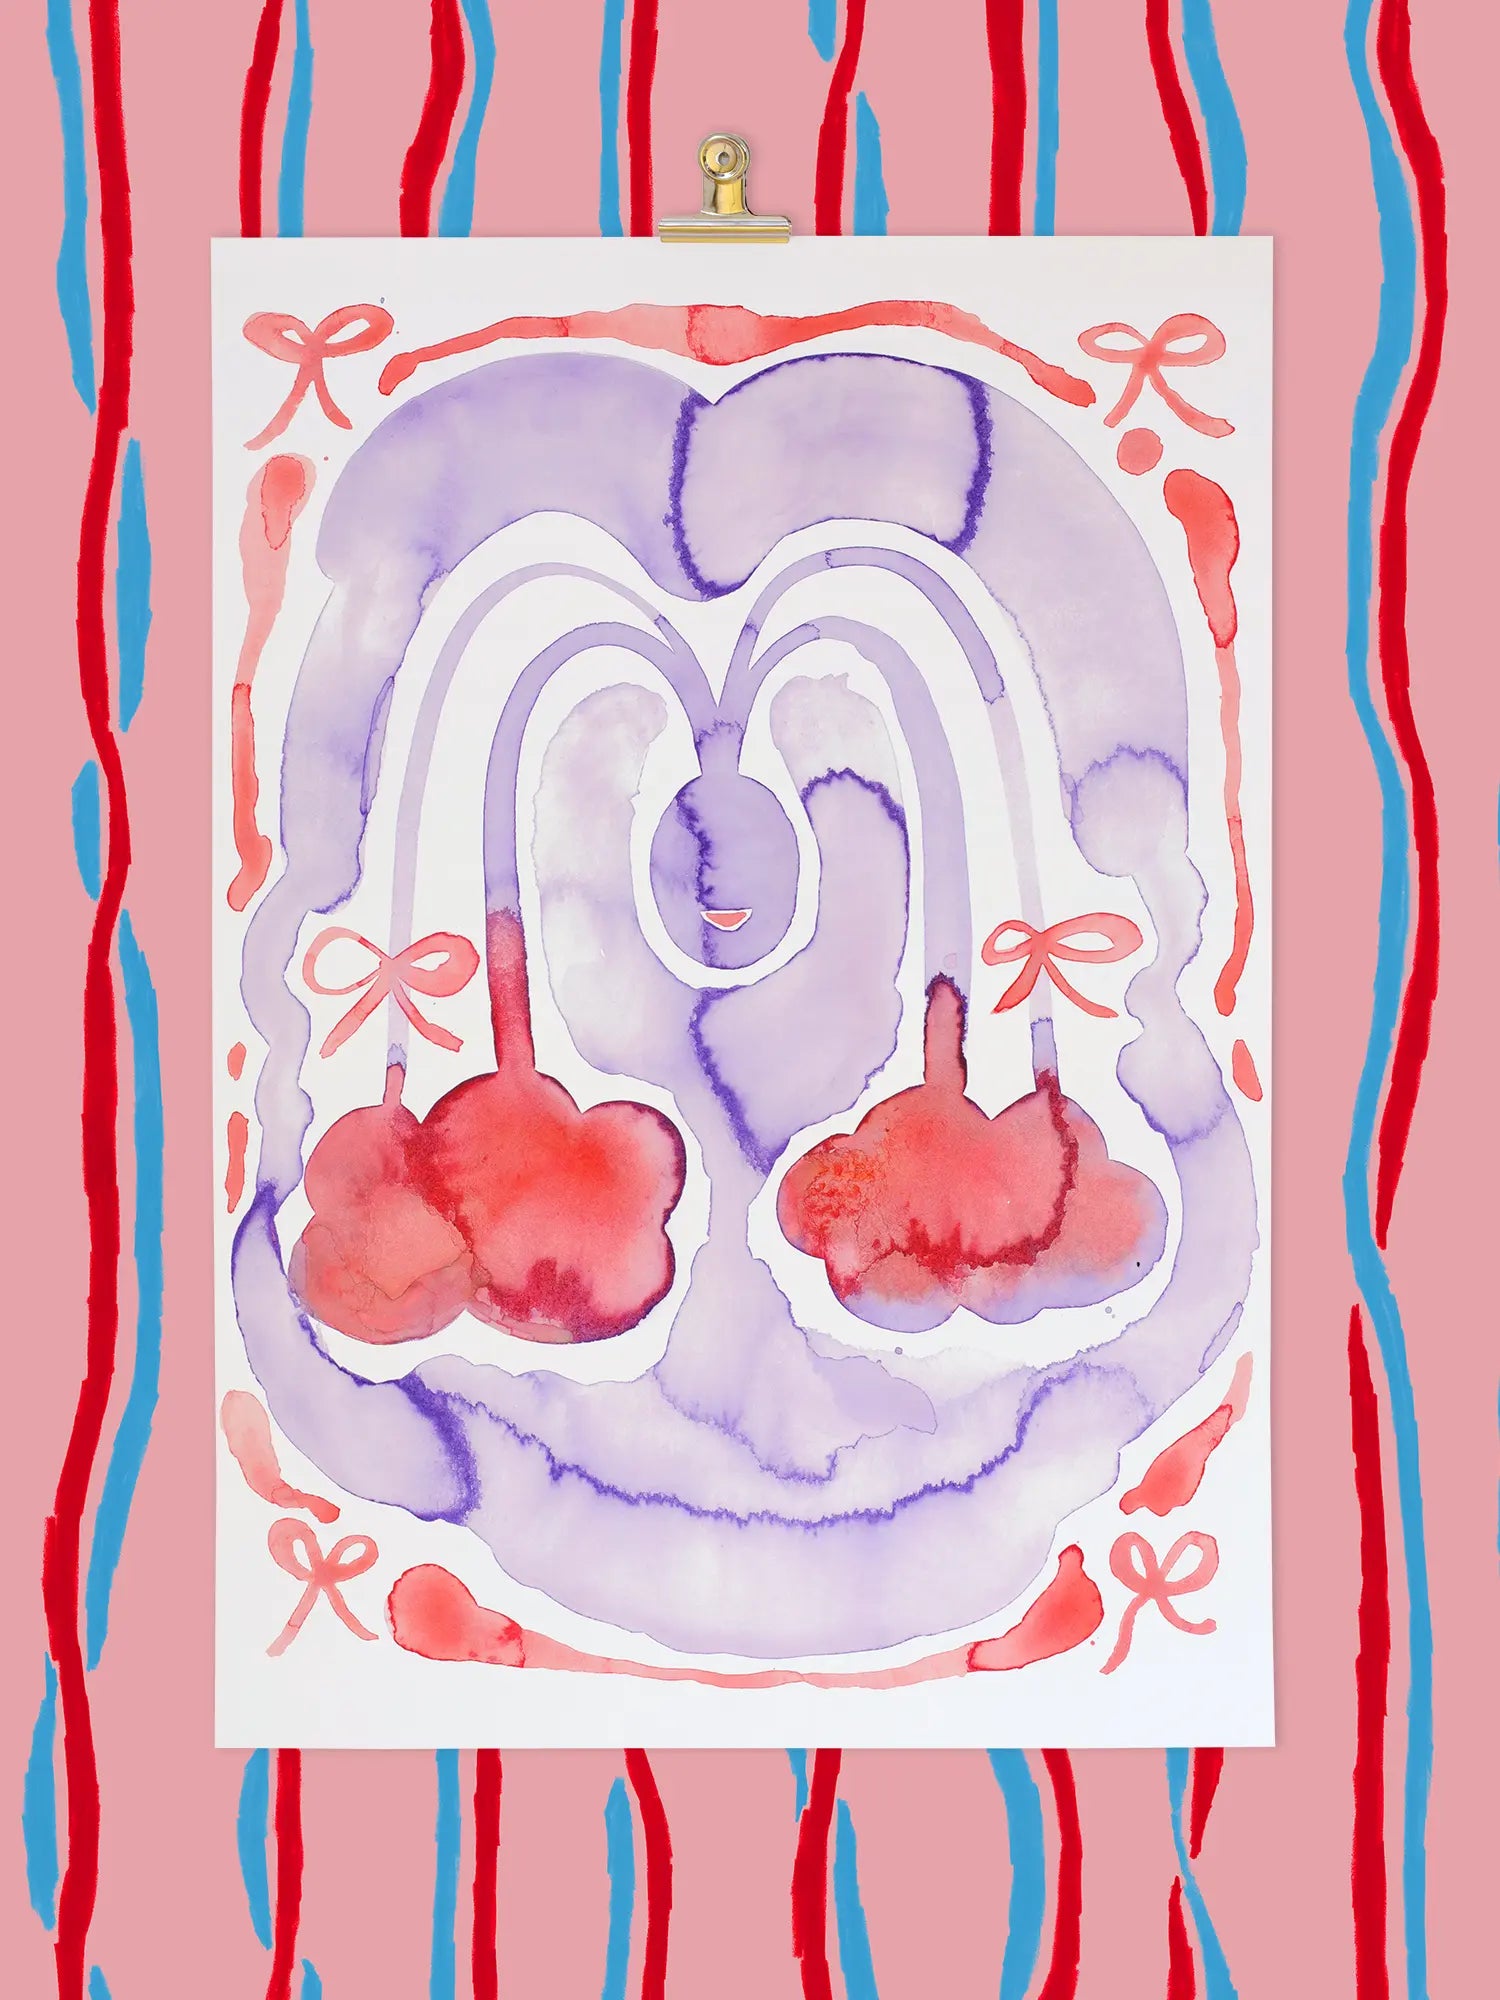 This Giclée print artwork explores the idea of landscape in its widest form: the landscape of the body. It is a celebration of feminine power, cycles of nature and eroticism in the everyday. Red, pink and purple watercolours with bows.